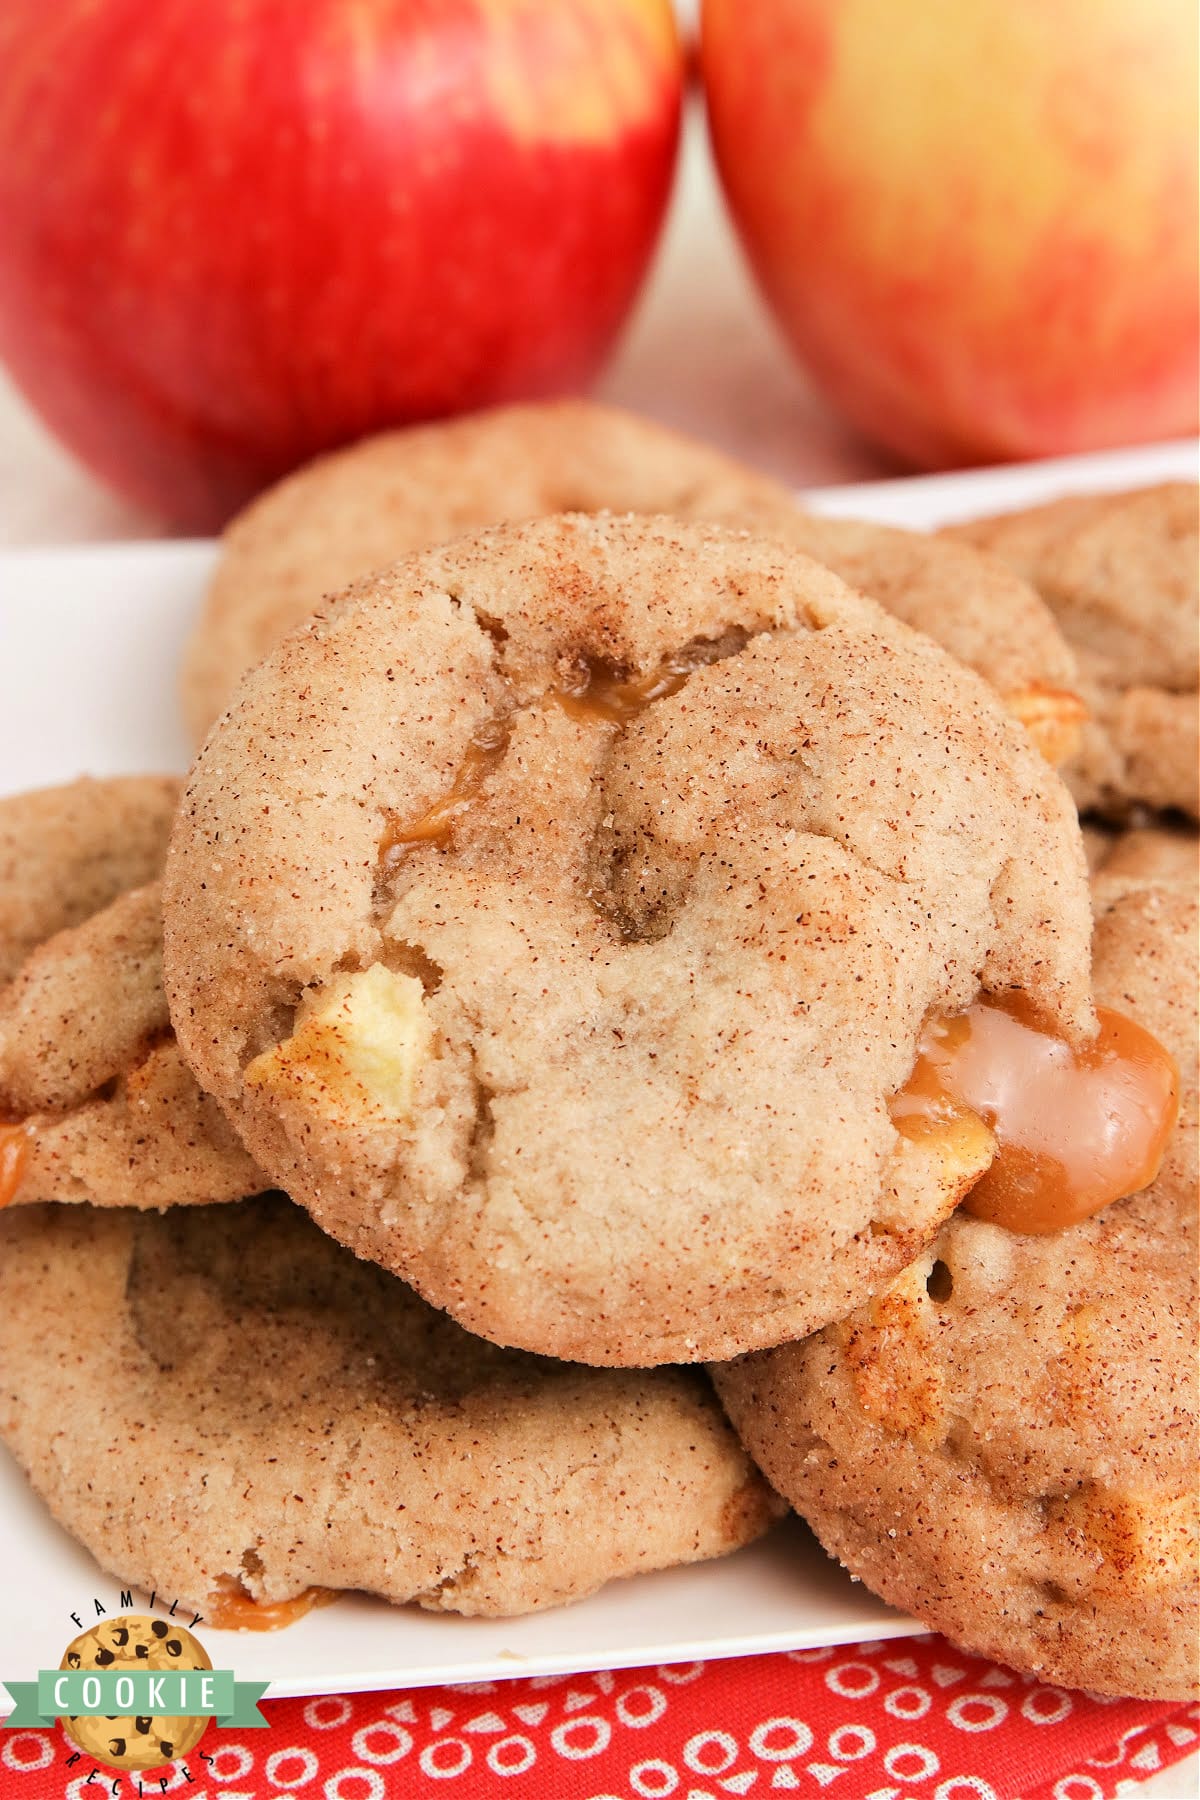 Snickerdoodle cookie recipe with caramel and apples